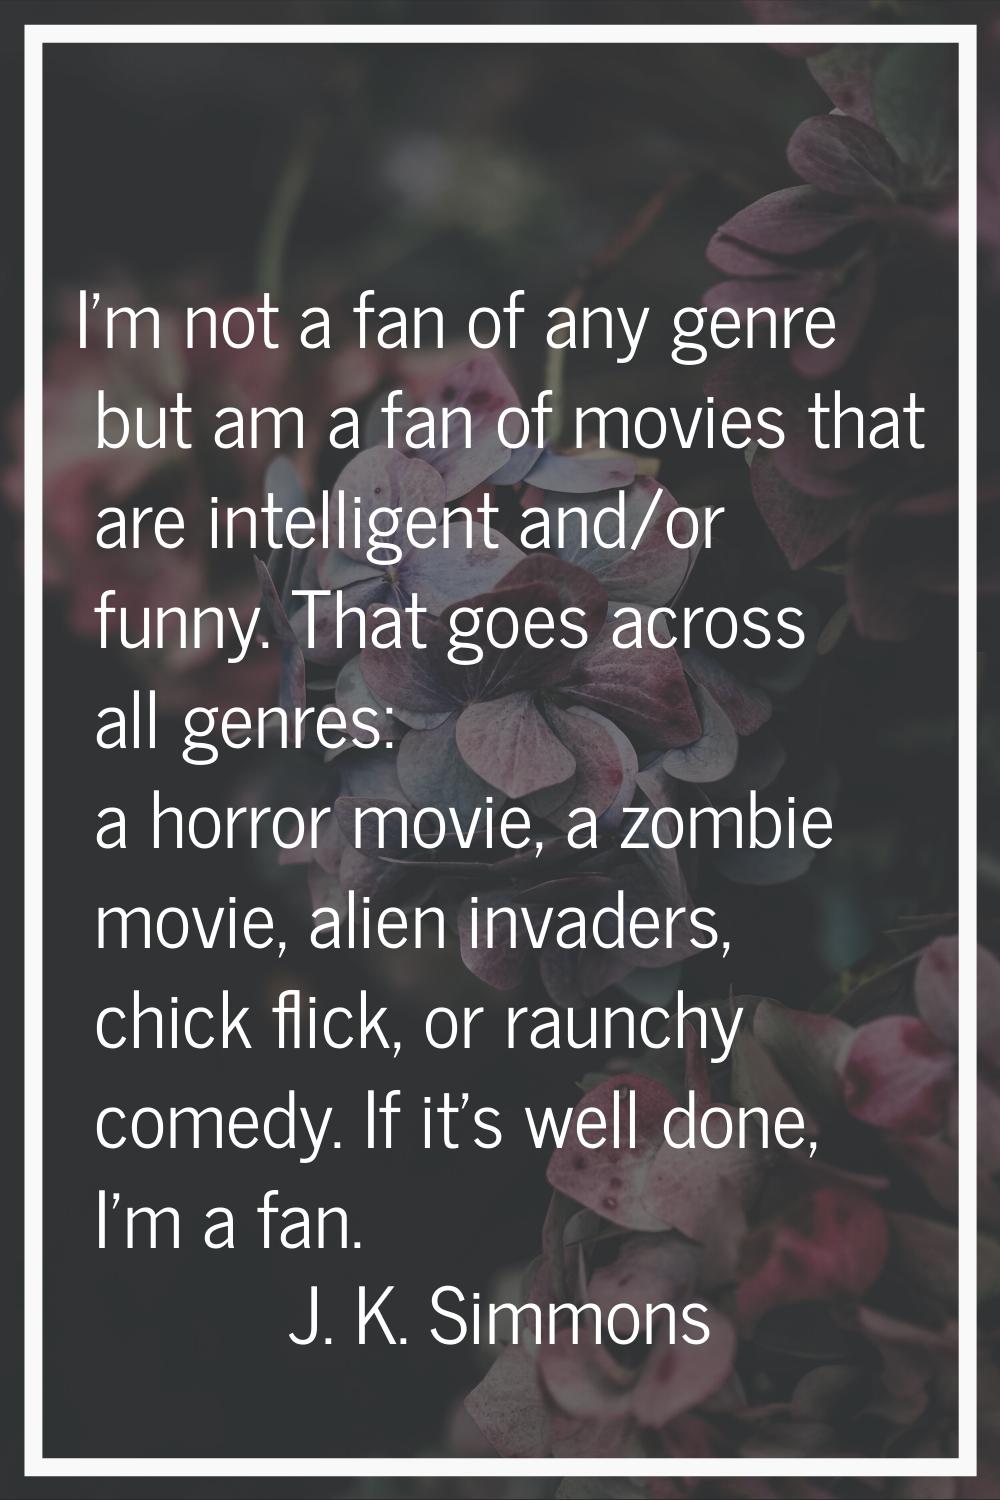 I'm not a fan of any genre but am a fan of movies that are intelligent and/or funny. That goes acro